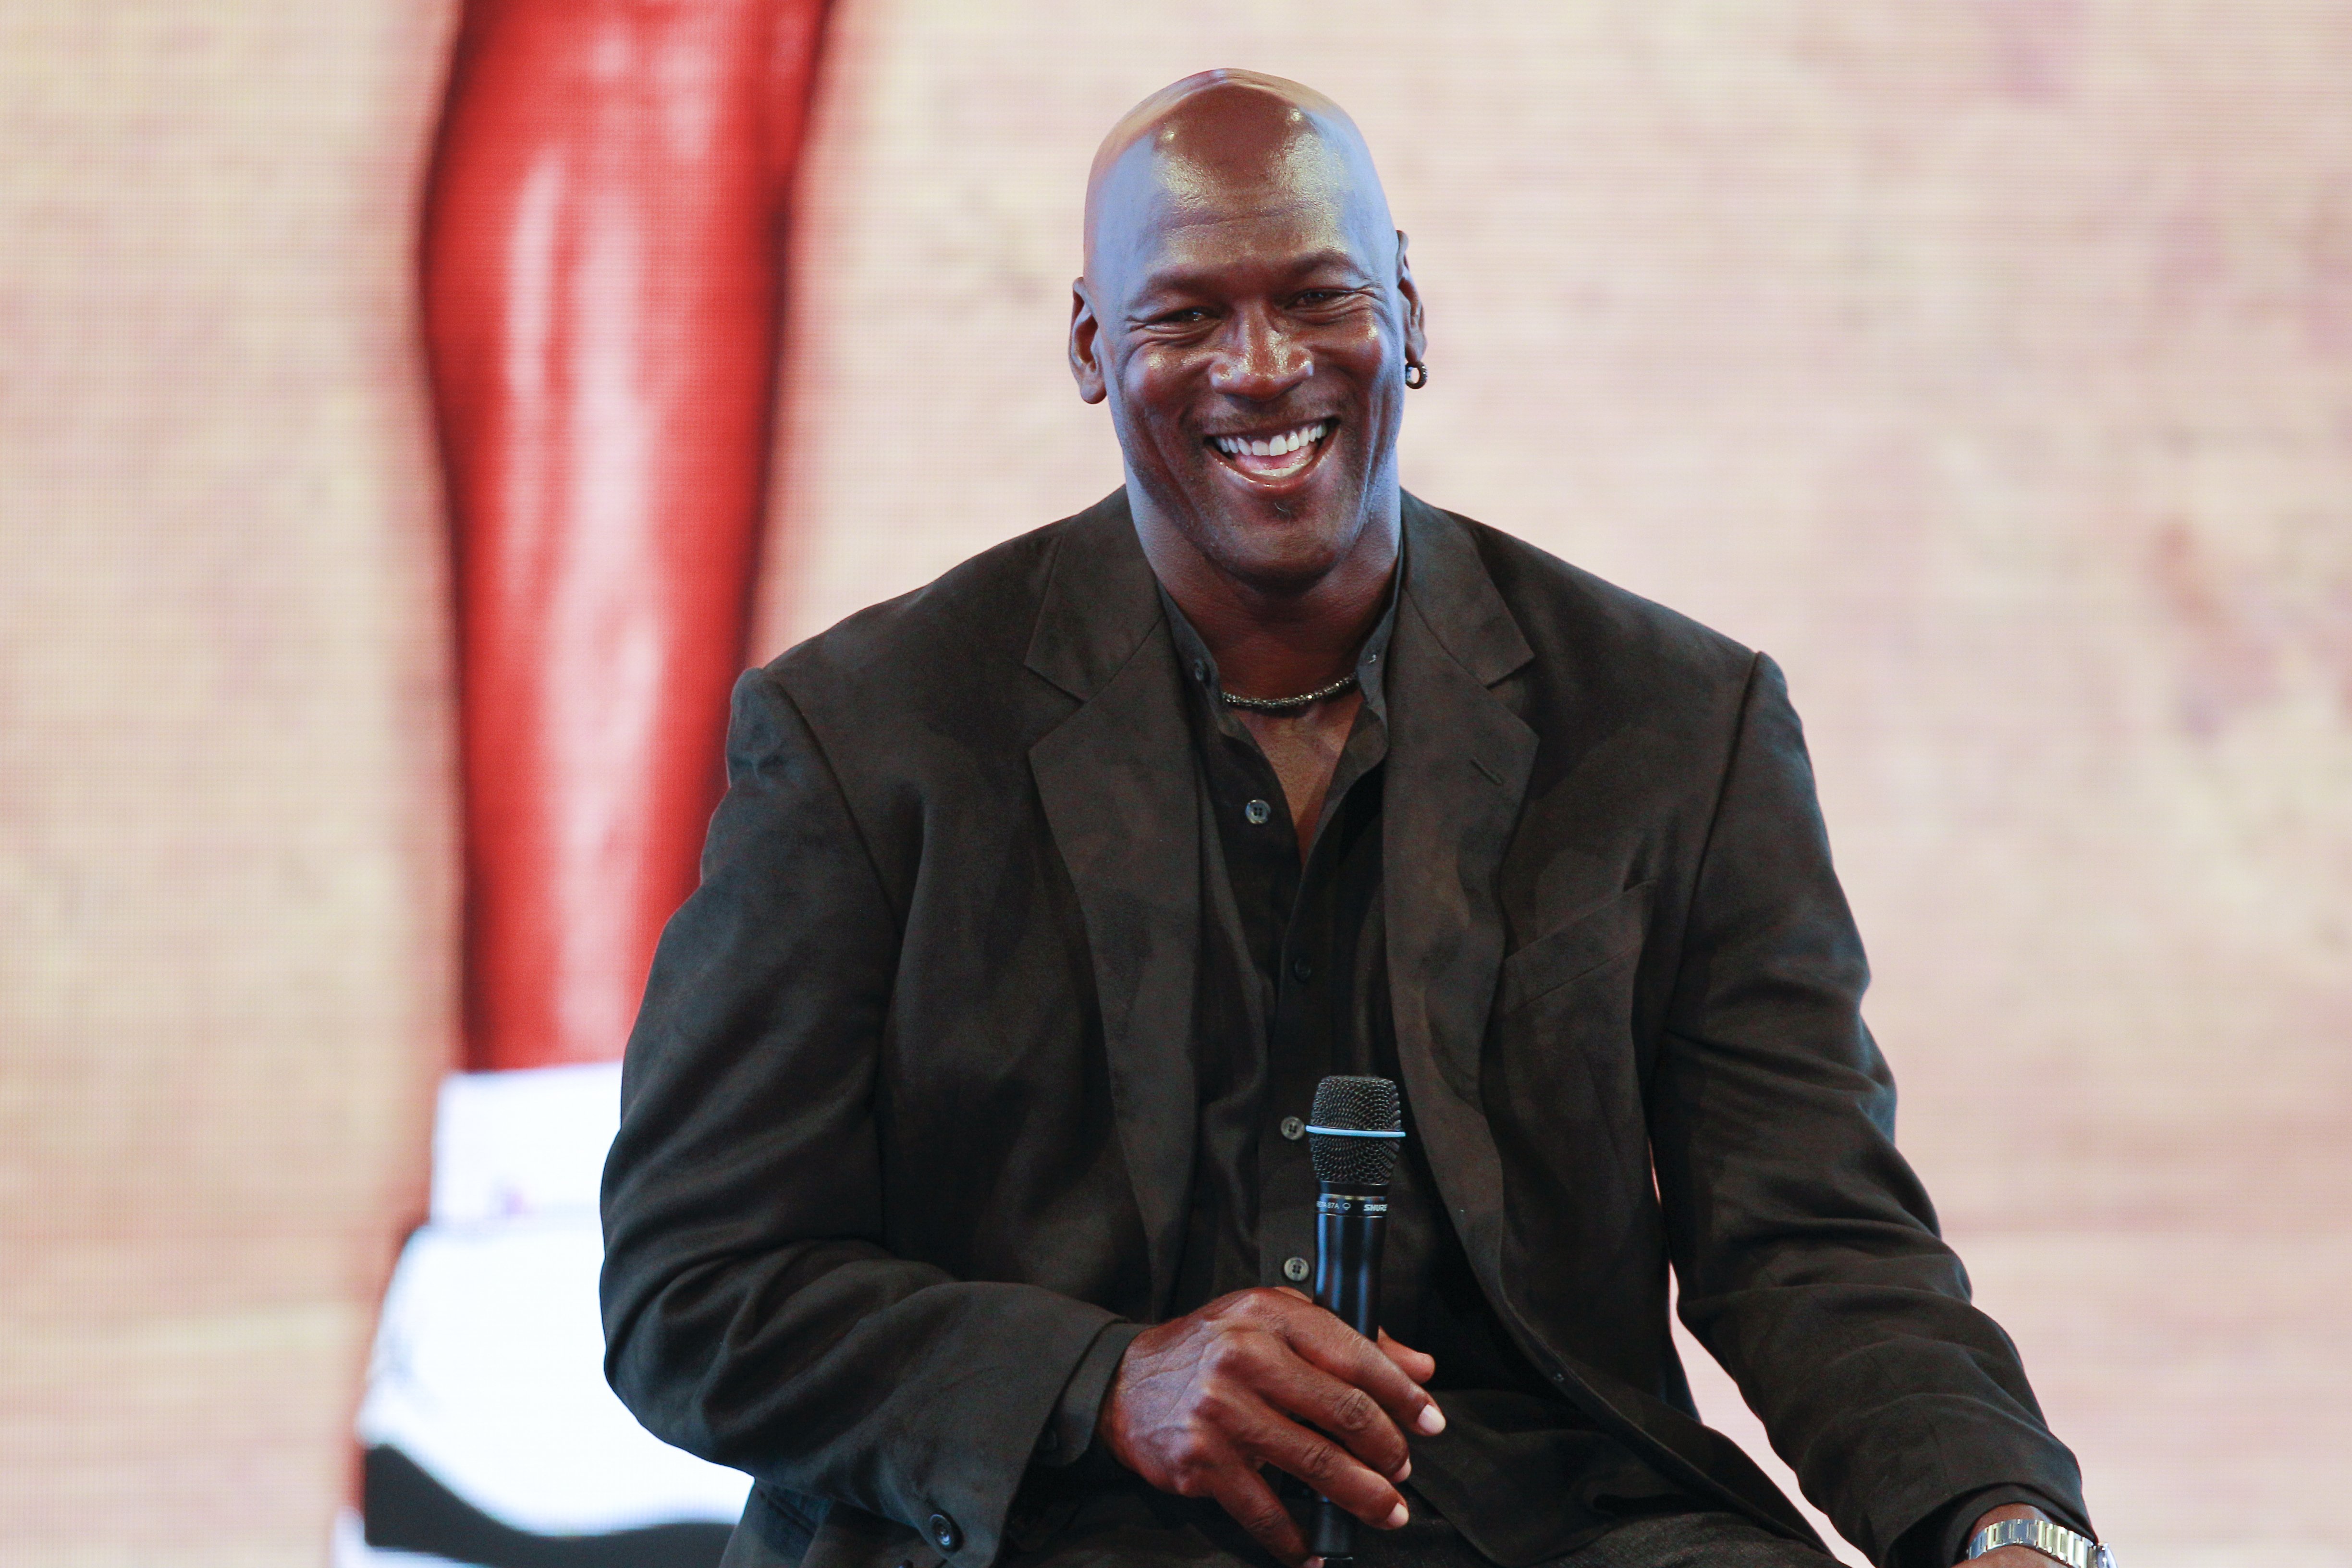 Michael Jordan attends a press conference for the celebration of the 30th anniversary of the Air Jordan Shoe during the 'Palais 23' interactive exhibition dedicated to Michael Jordan at Palais de Tokyo in Paris on June 12, 2015 | Photo: GettyImages